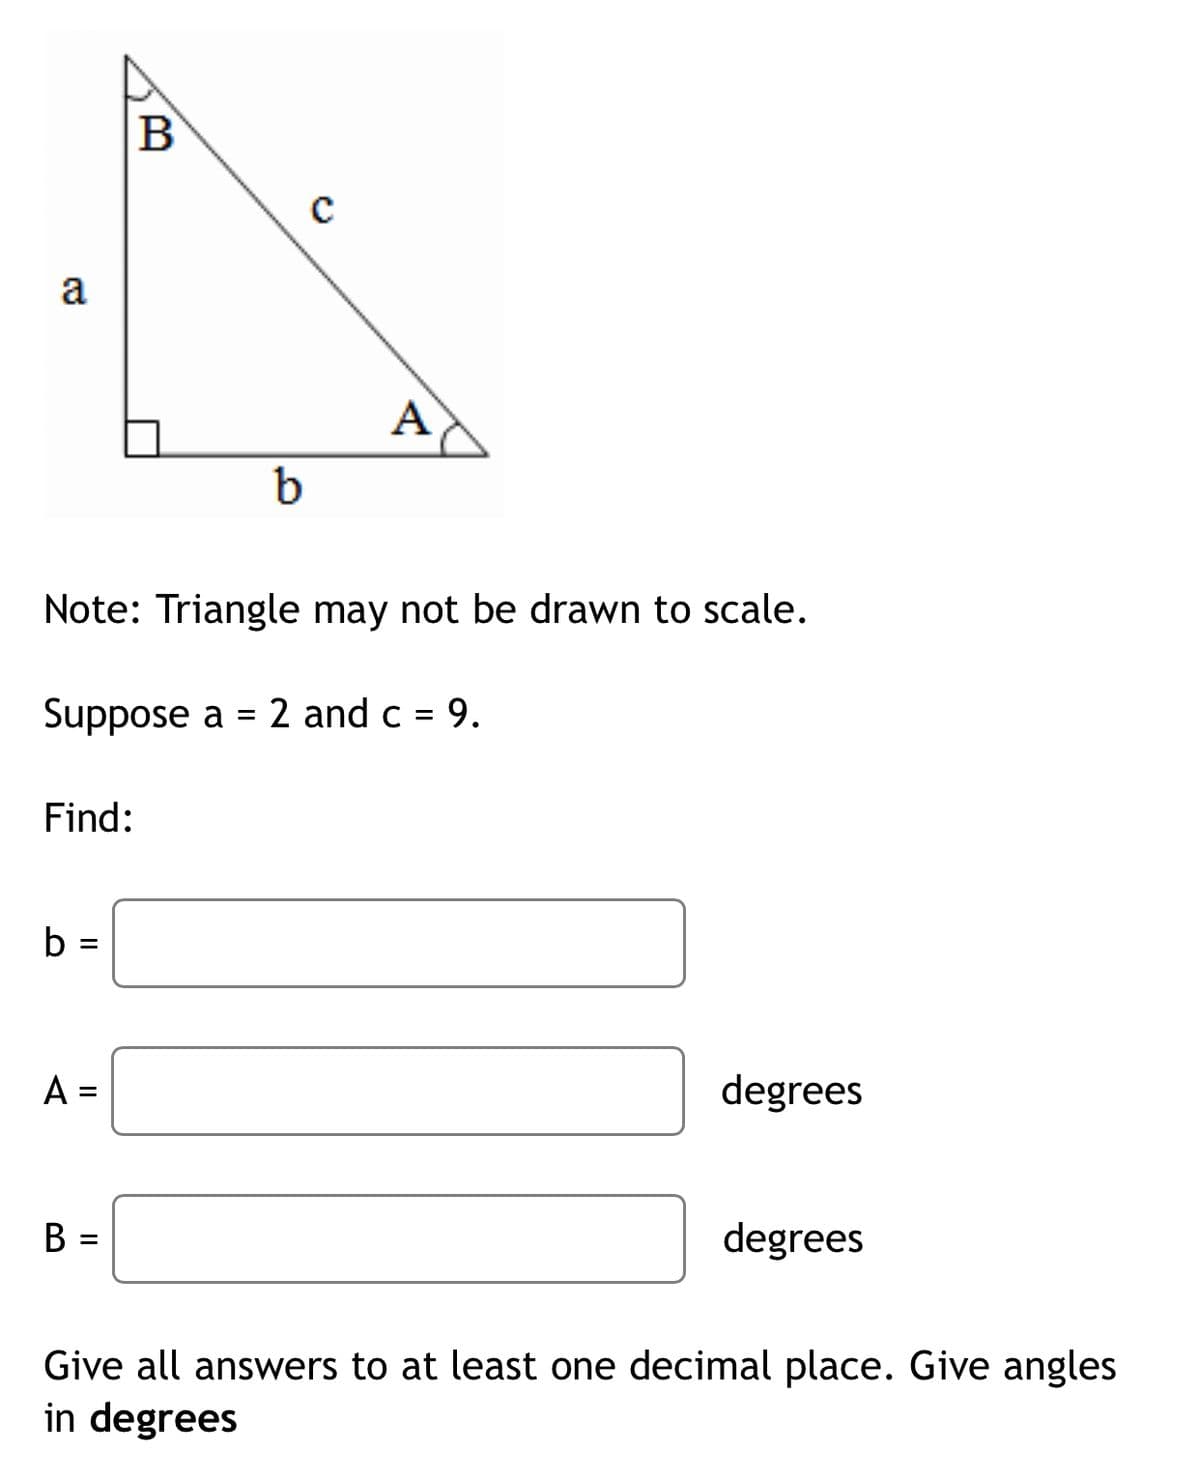 B
a
A
Note: Triangle may not be drawn to scale.
Suppose a = 2 and c = 9.
Find:
b
%3D
A =
degrees
B =
degrees
Give all answers to at least one decimal place. Give angles
in degrees
II
